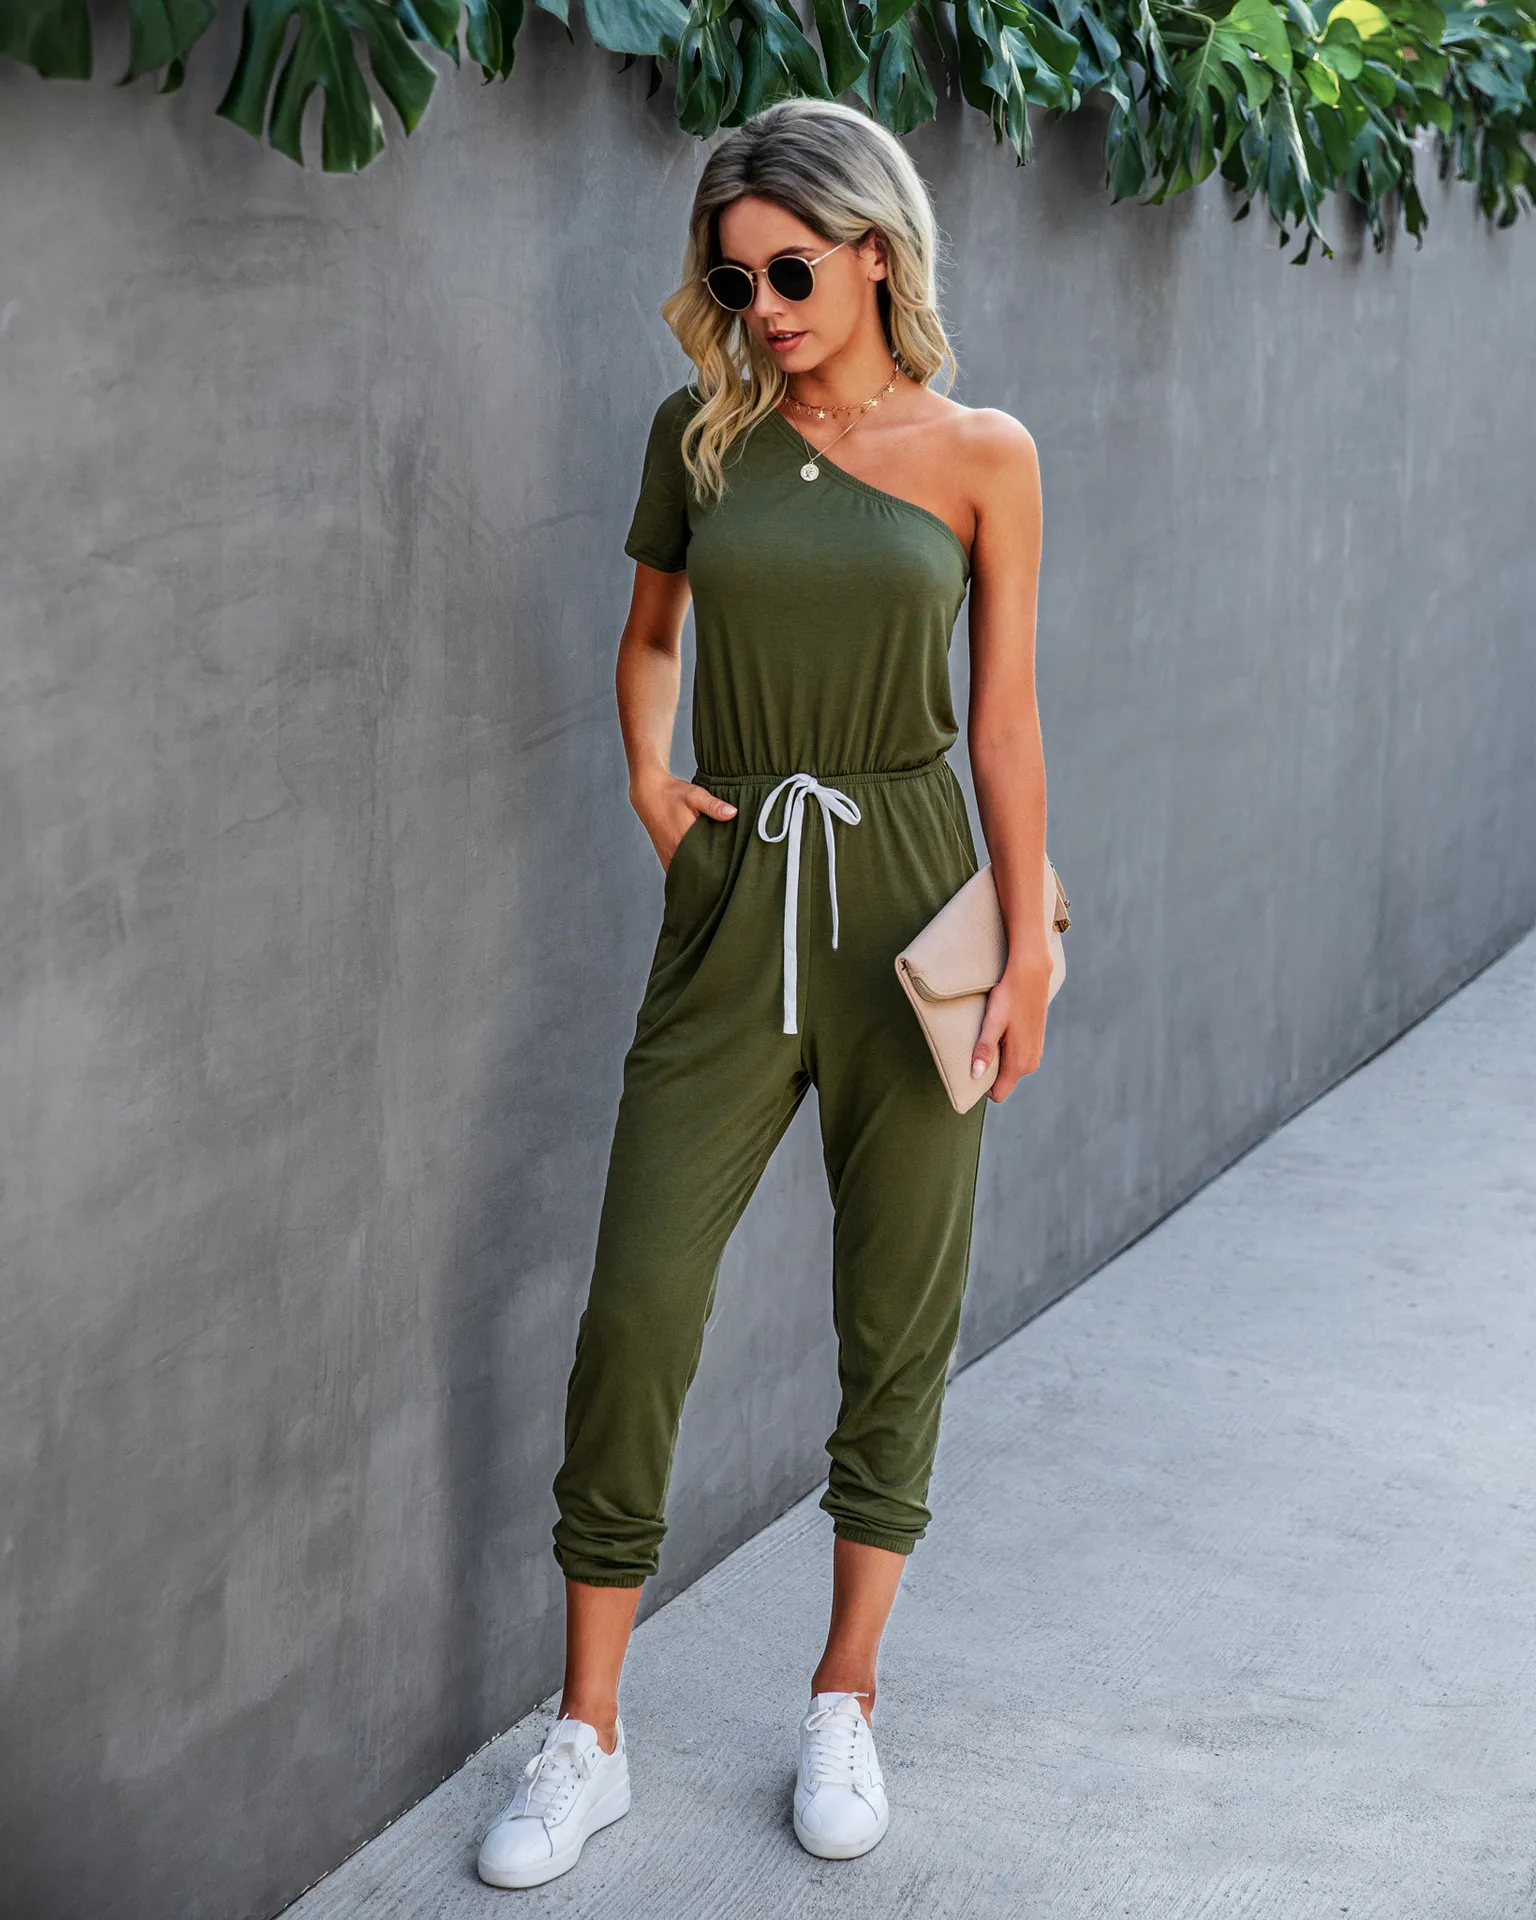 

Women Jumpsuit Sexy Backless Inclined Shoulder Short Sleeved Pockets 2021 New Romper Playsuit Casual knitting Siamese Trousers